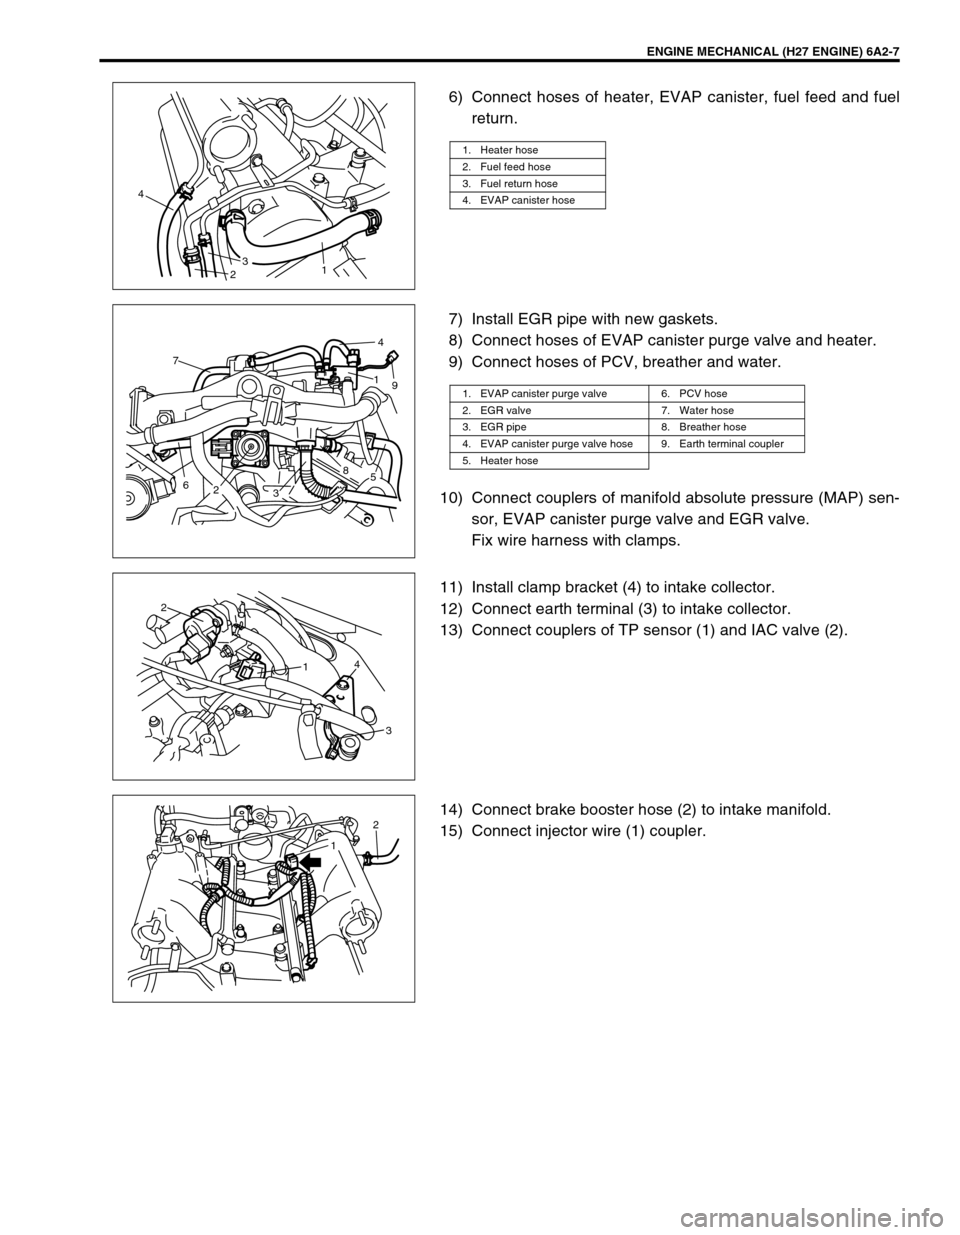 SUZUKI GRAND VITARA 2001 2.G User Guide ENGINE MECHANICAL (H27 ENGINE) 6A2-7
6) Connect hoses of heater, EVAP canister, fuel feed and fuel
return.
7) Install EGR pipe with new gaskets.
8) Connect hoses of EVAP canister purge valve and heate